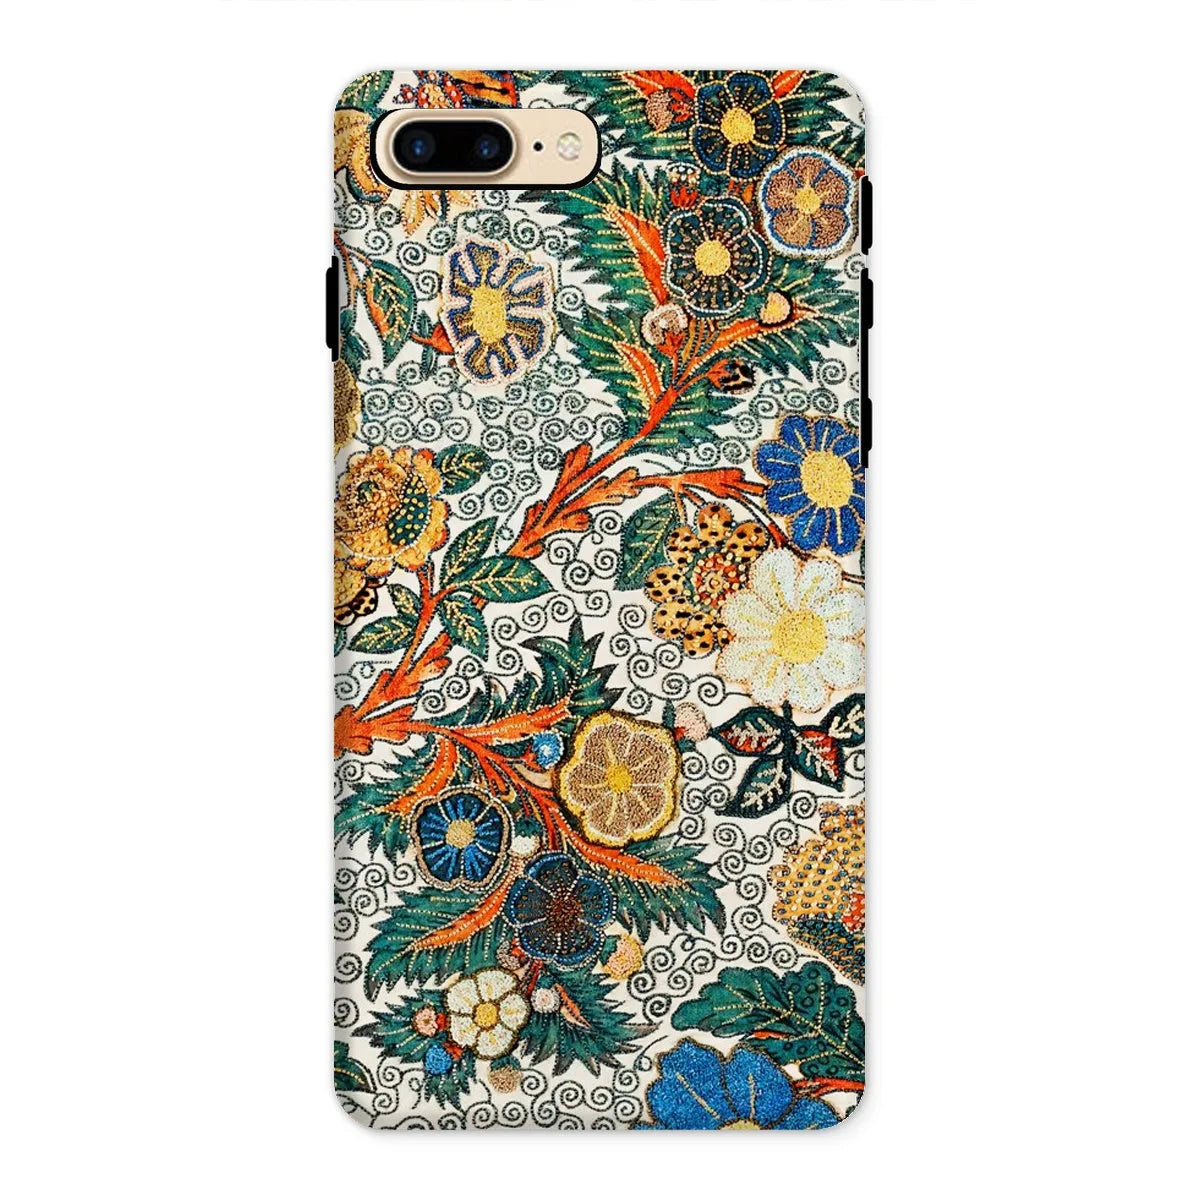 Blossomewhere Japanese Tapestry Art Phone Case - Iphone 8 Plus / Matte - Mobile Phone Cases - Aesthetic Art